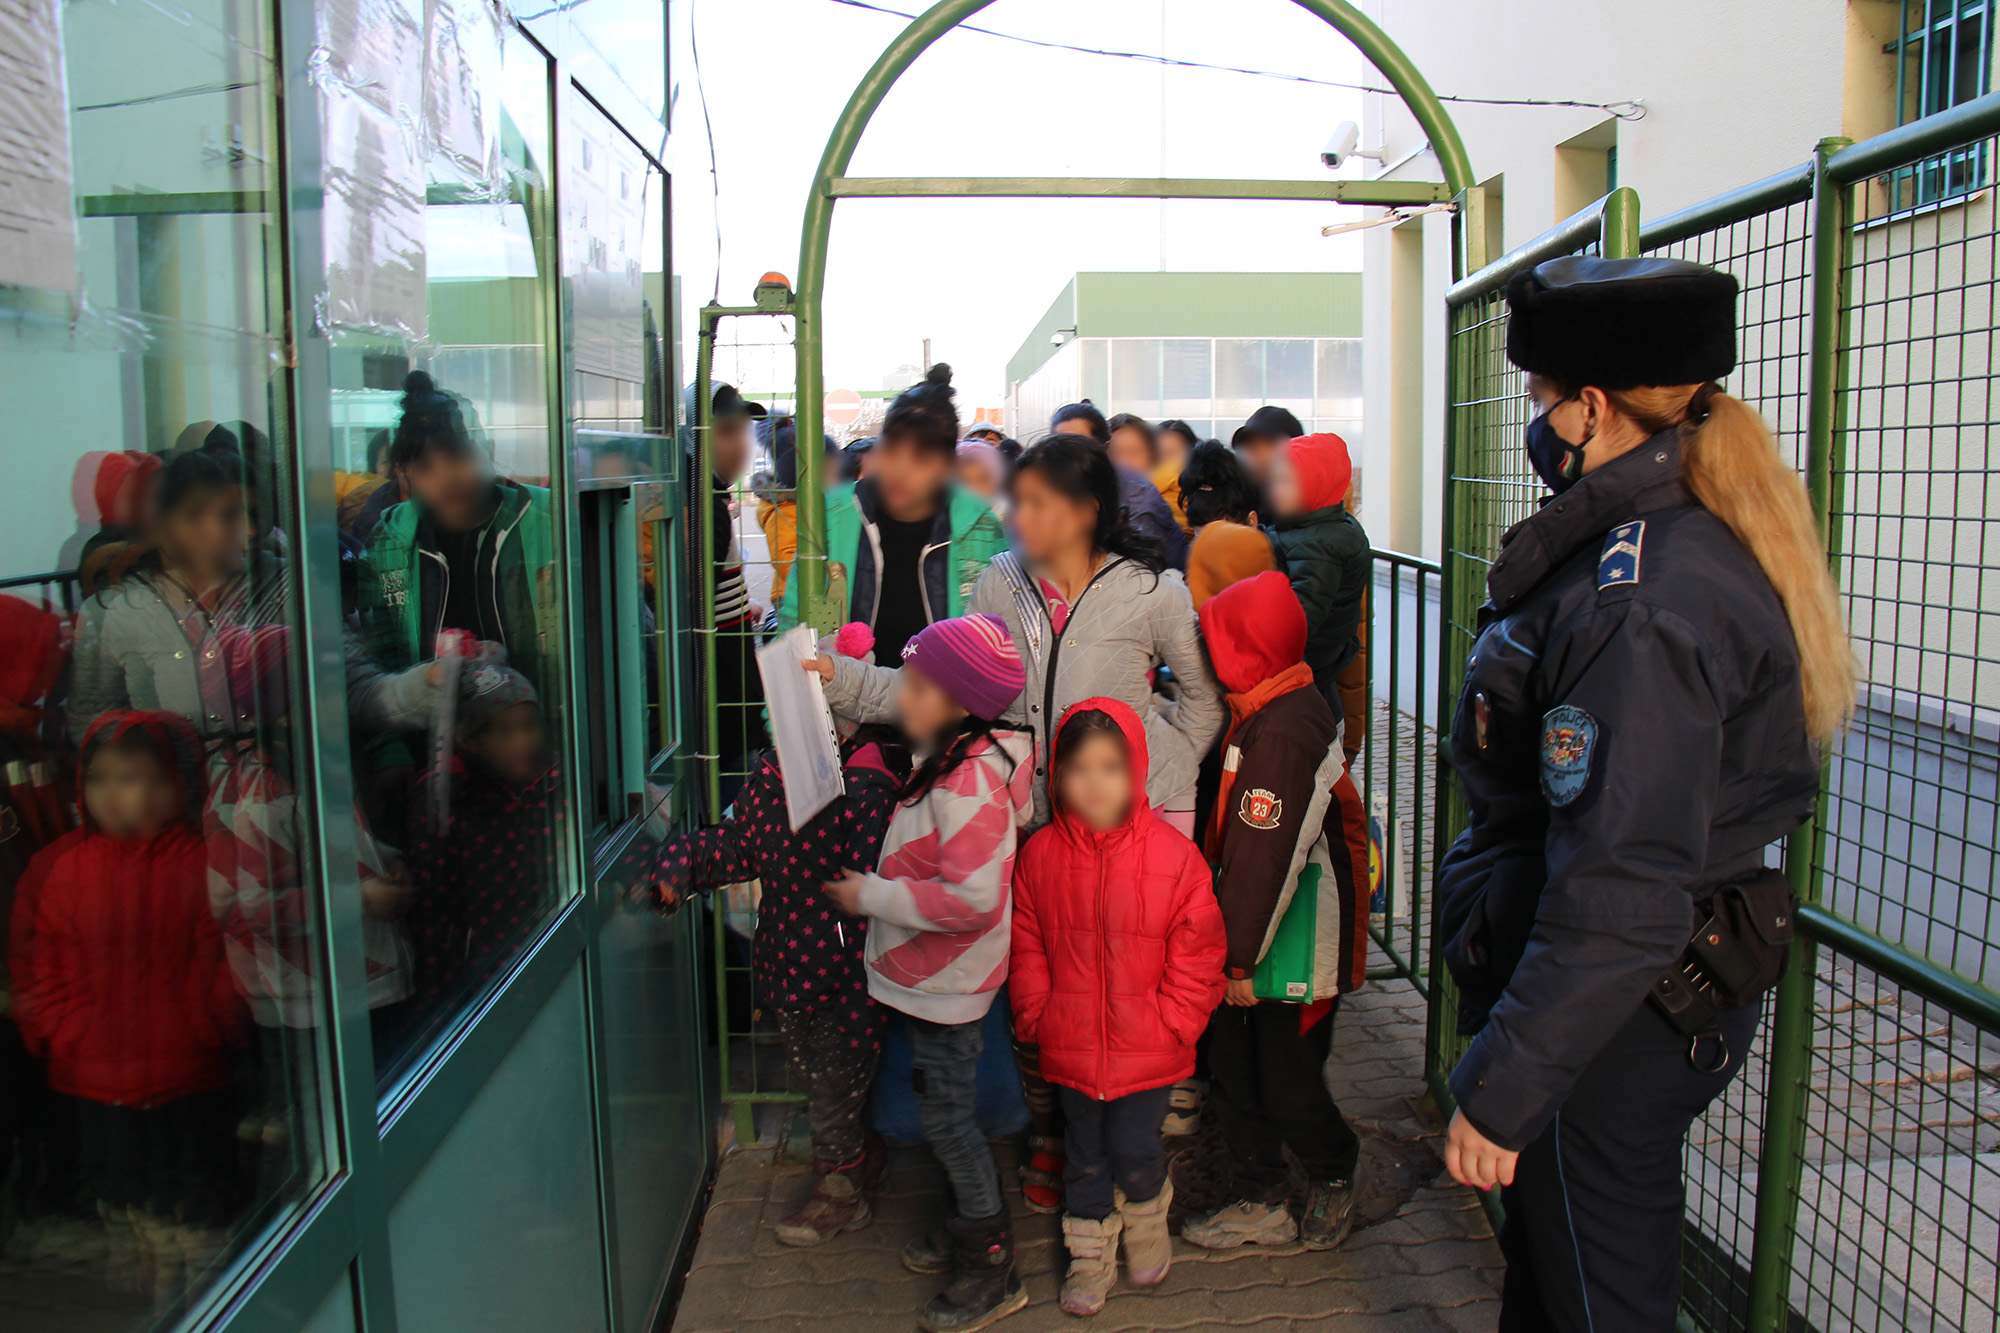 Hungary Guarantees 24/7 Healthcare for Refugees